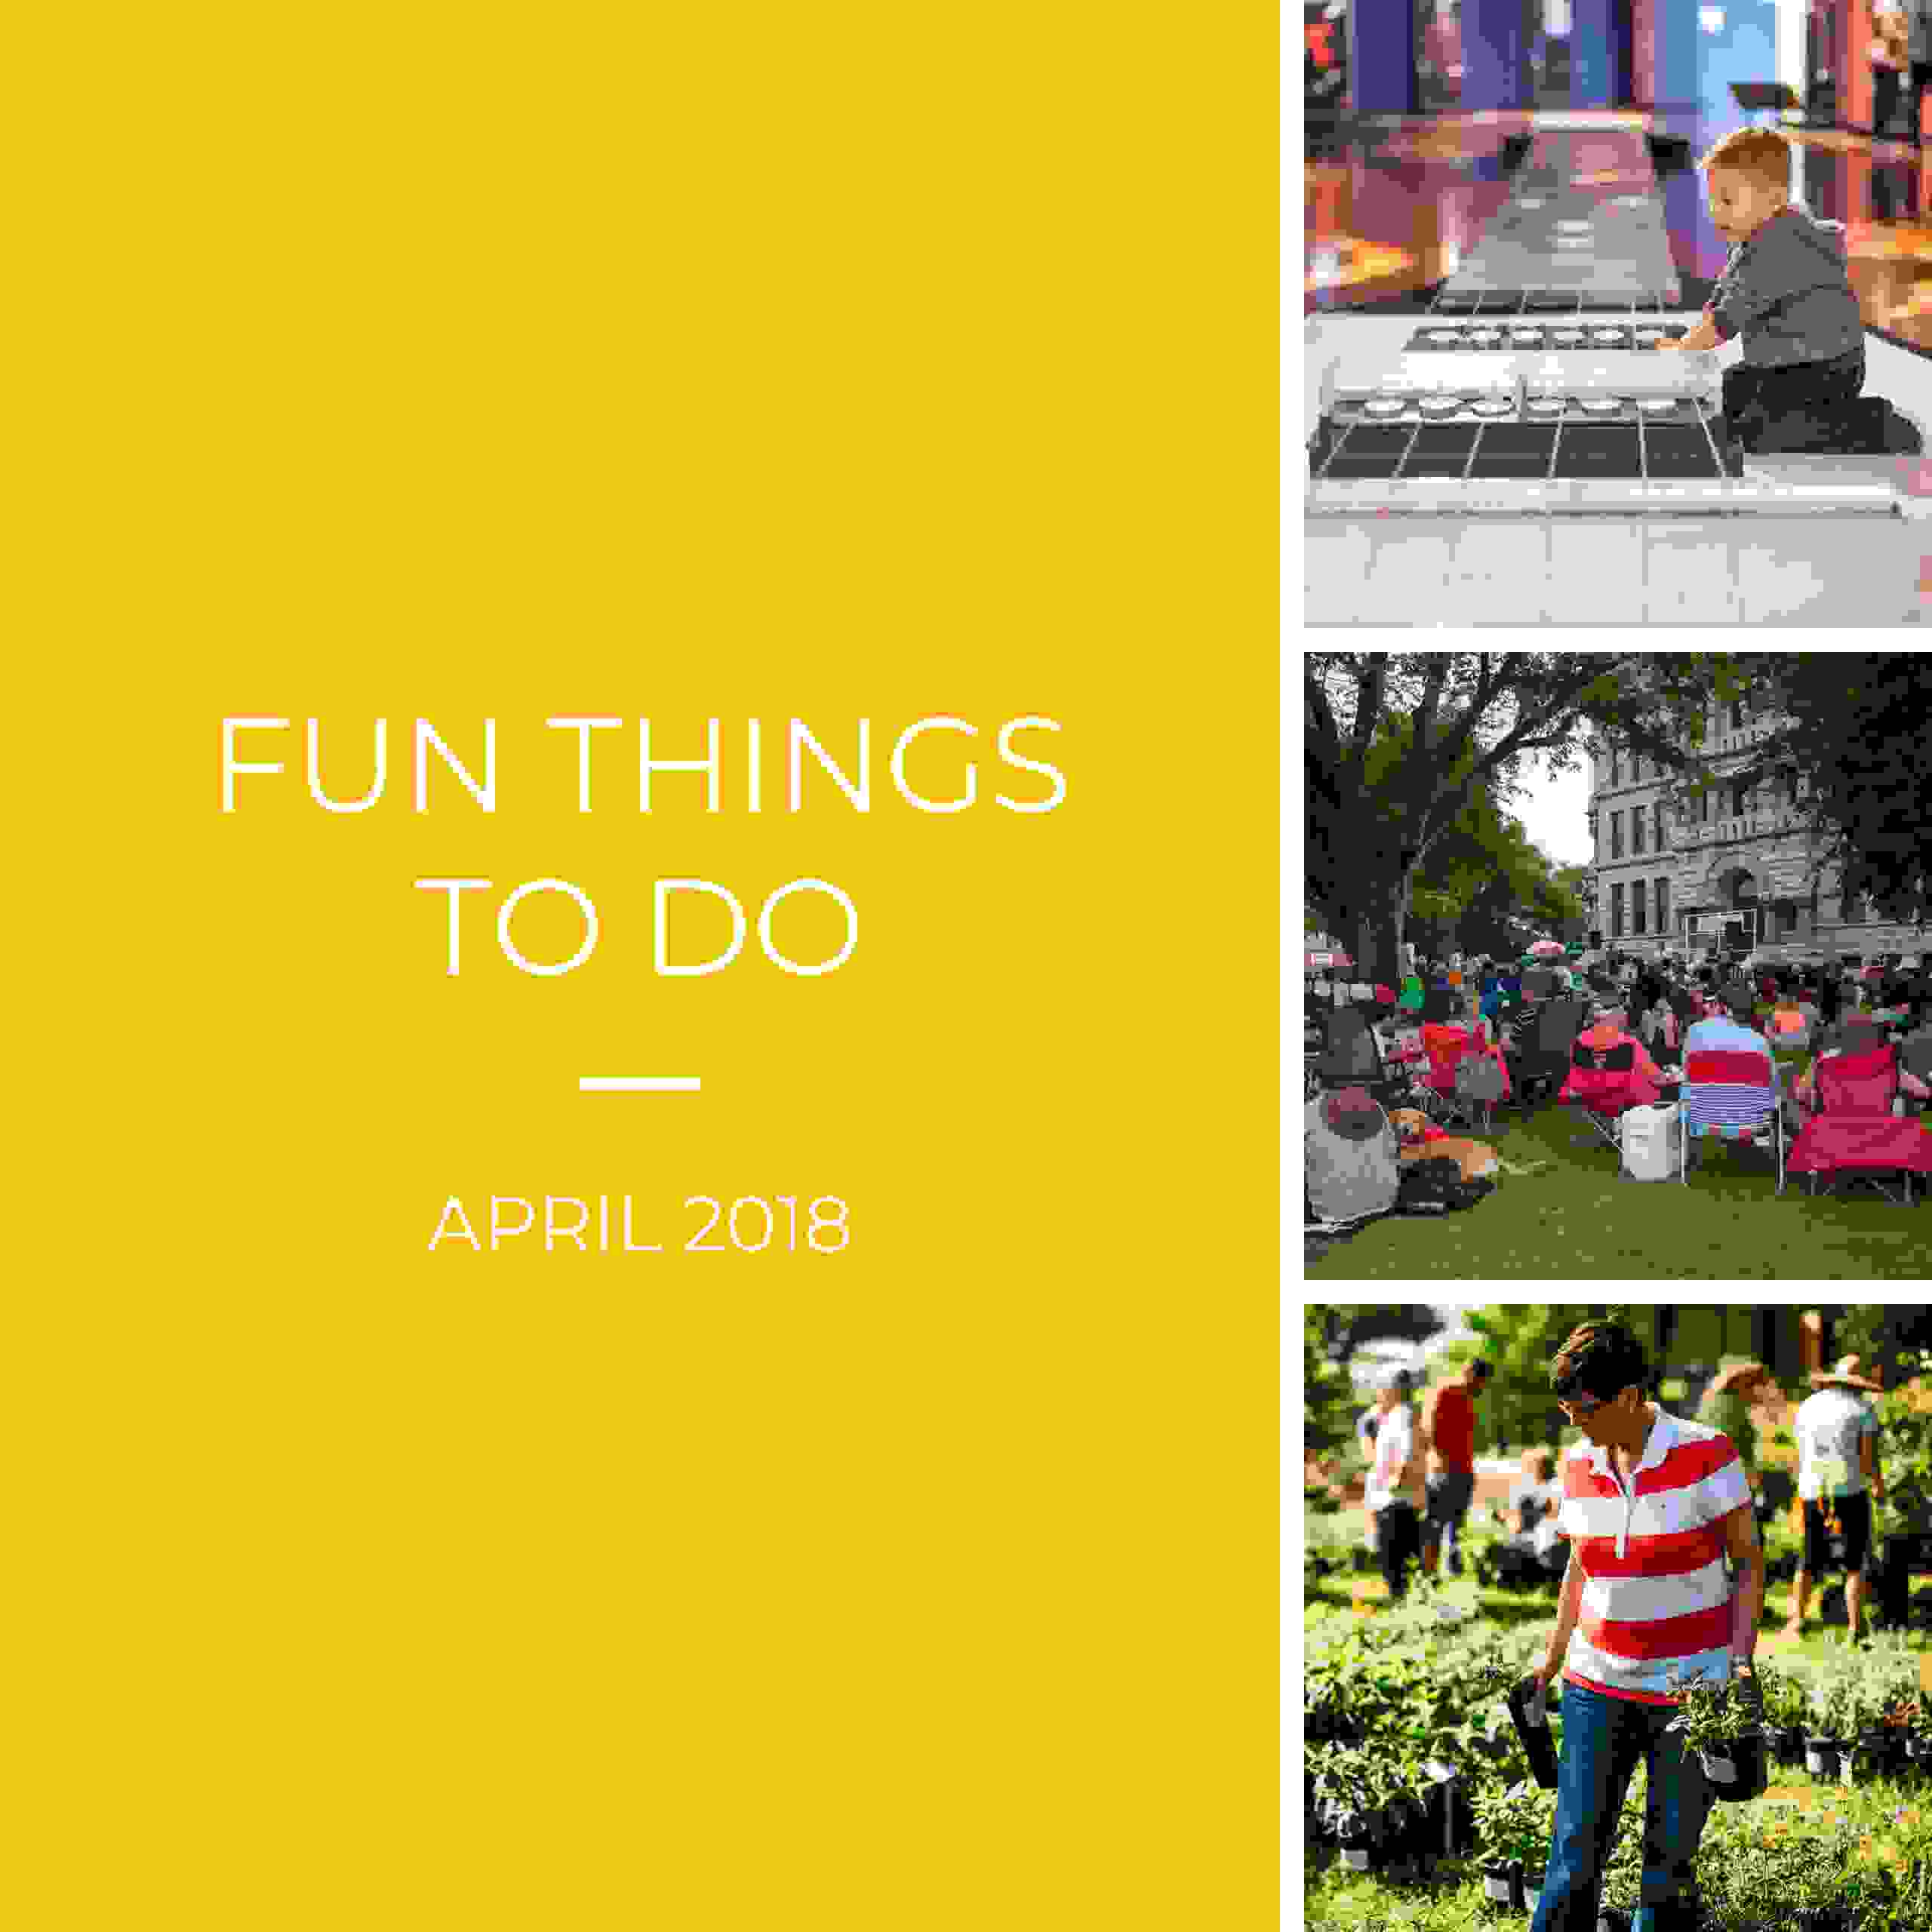 Spring has Sprung – Fun Things to do in April